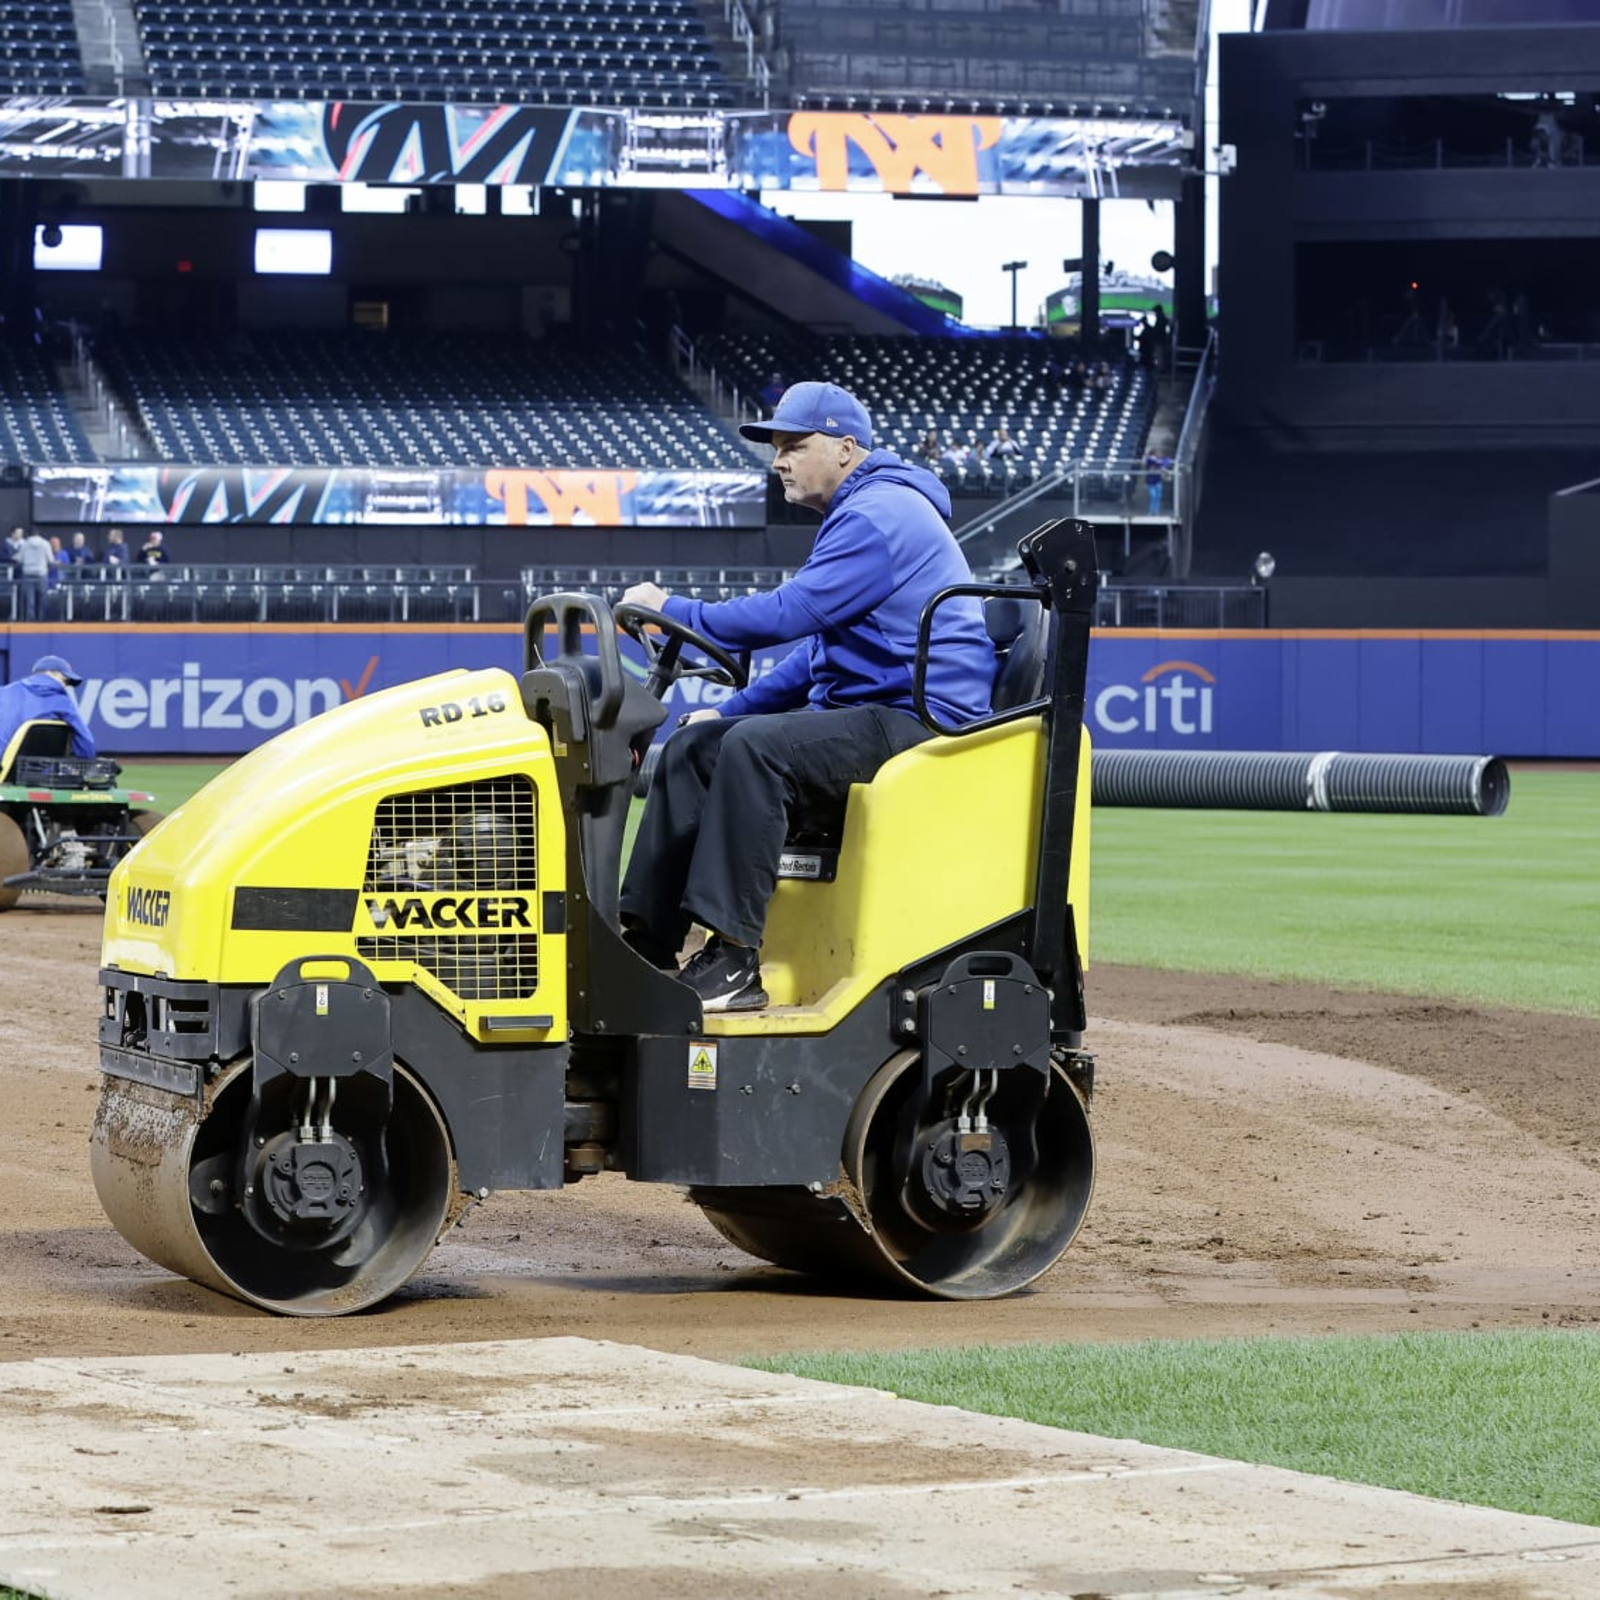 Marlins-Mets game postponed due to unplayable field conditions